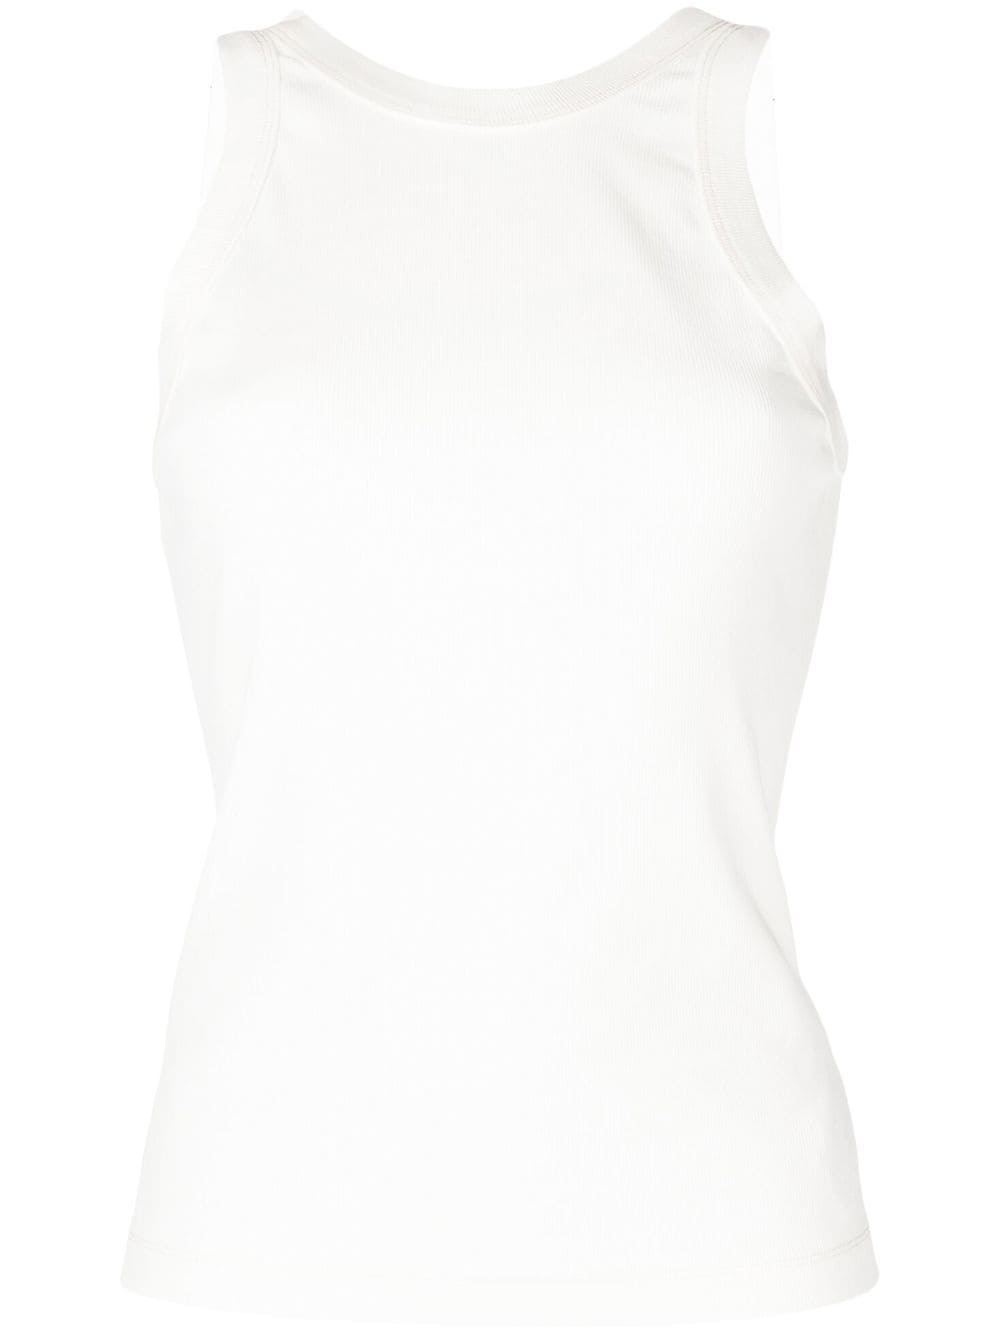 Dion Lee cut out tank top